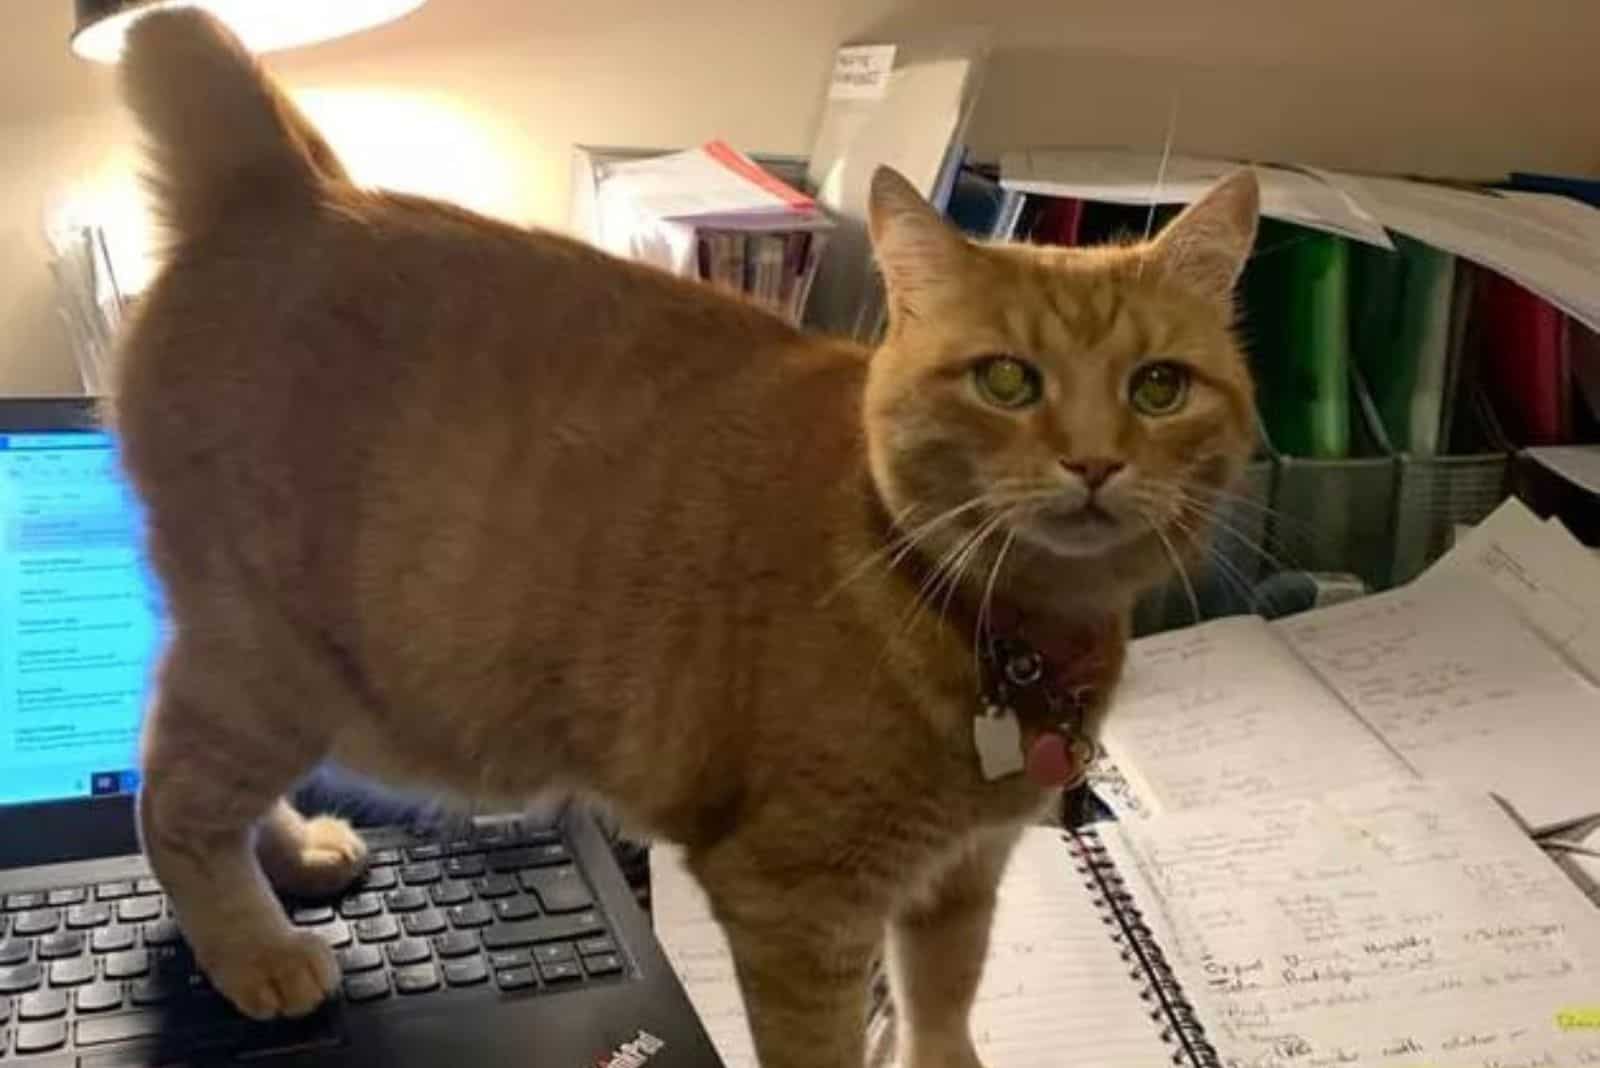 funny photo of an orange cat standing on a laptop with a grumpy expression